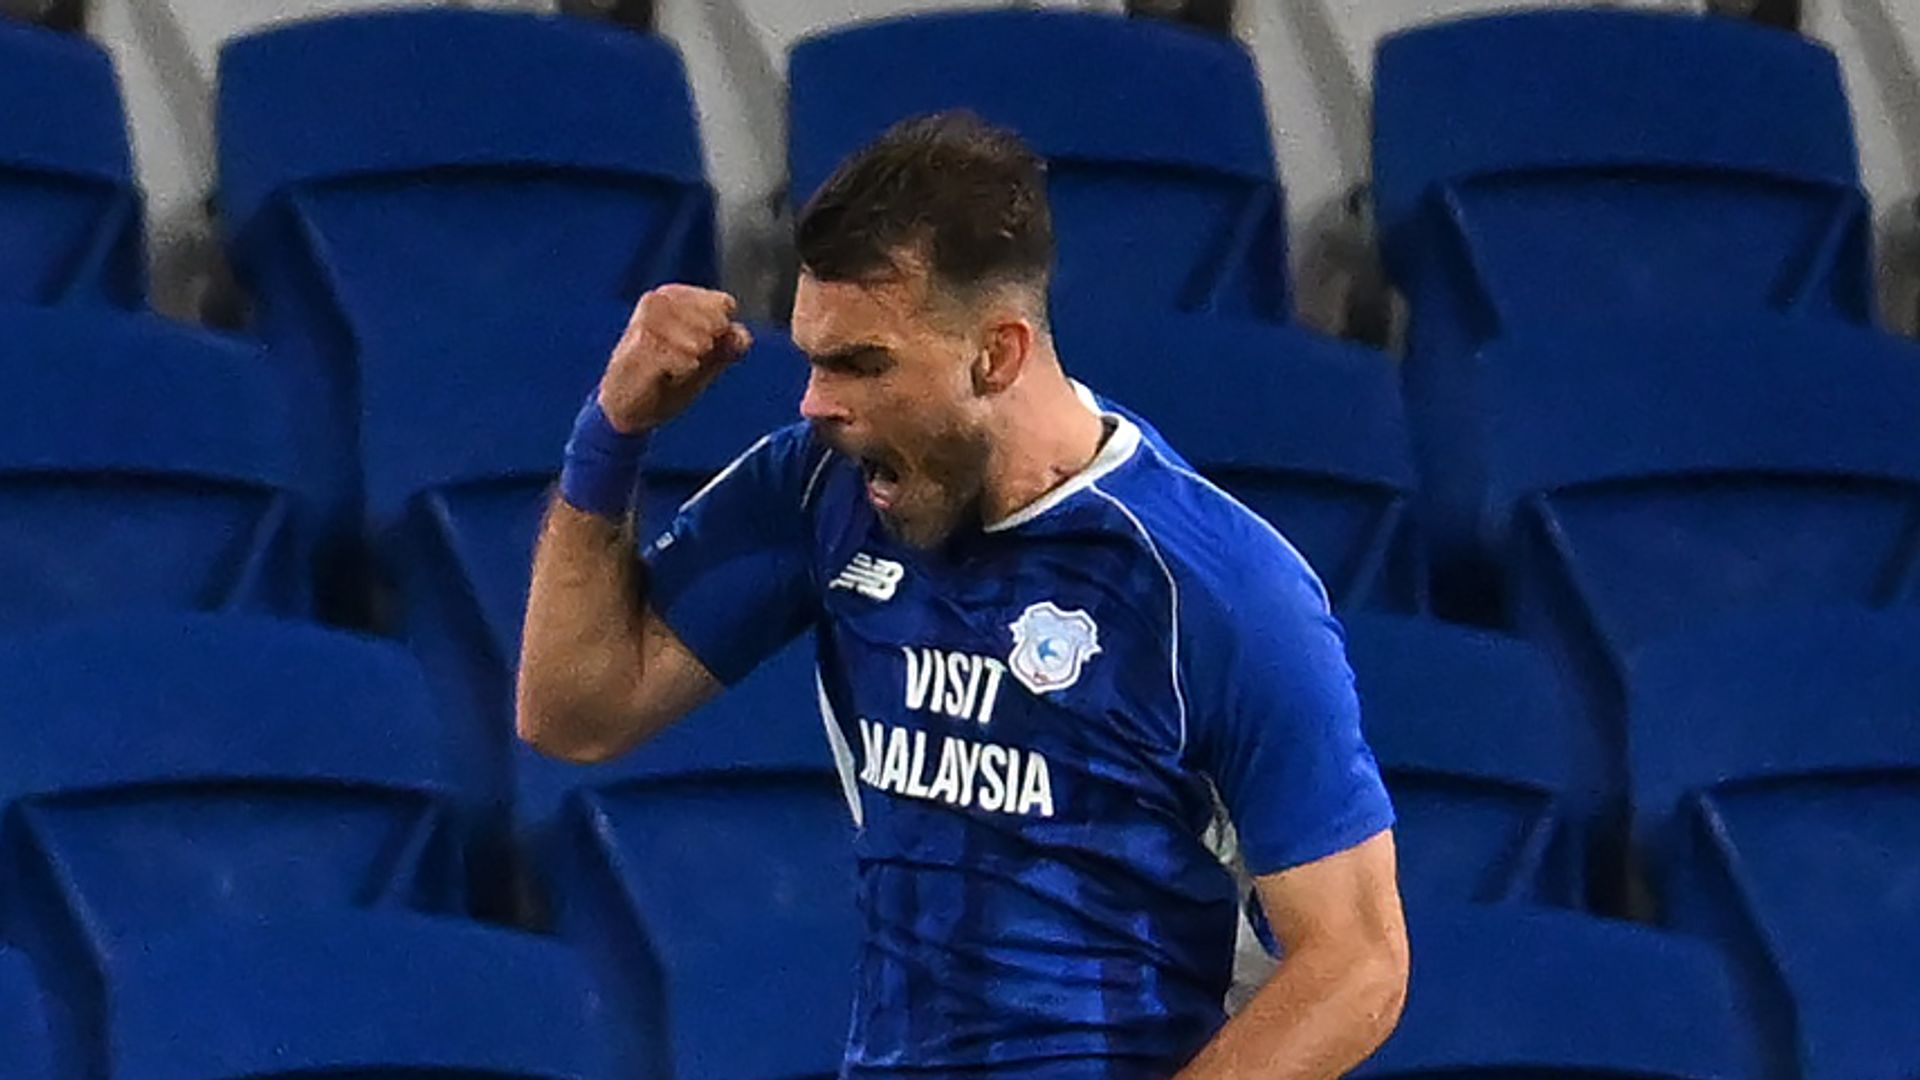 Cardiff beat Coventry in five-goal thriller